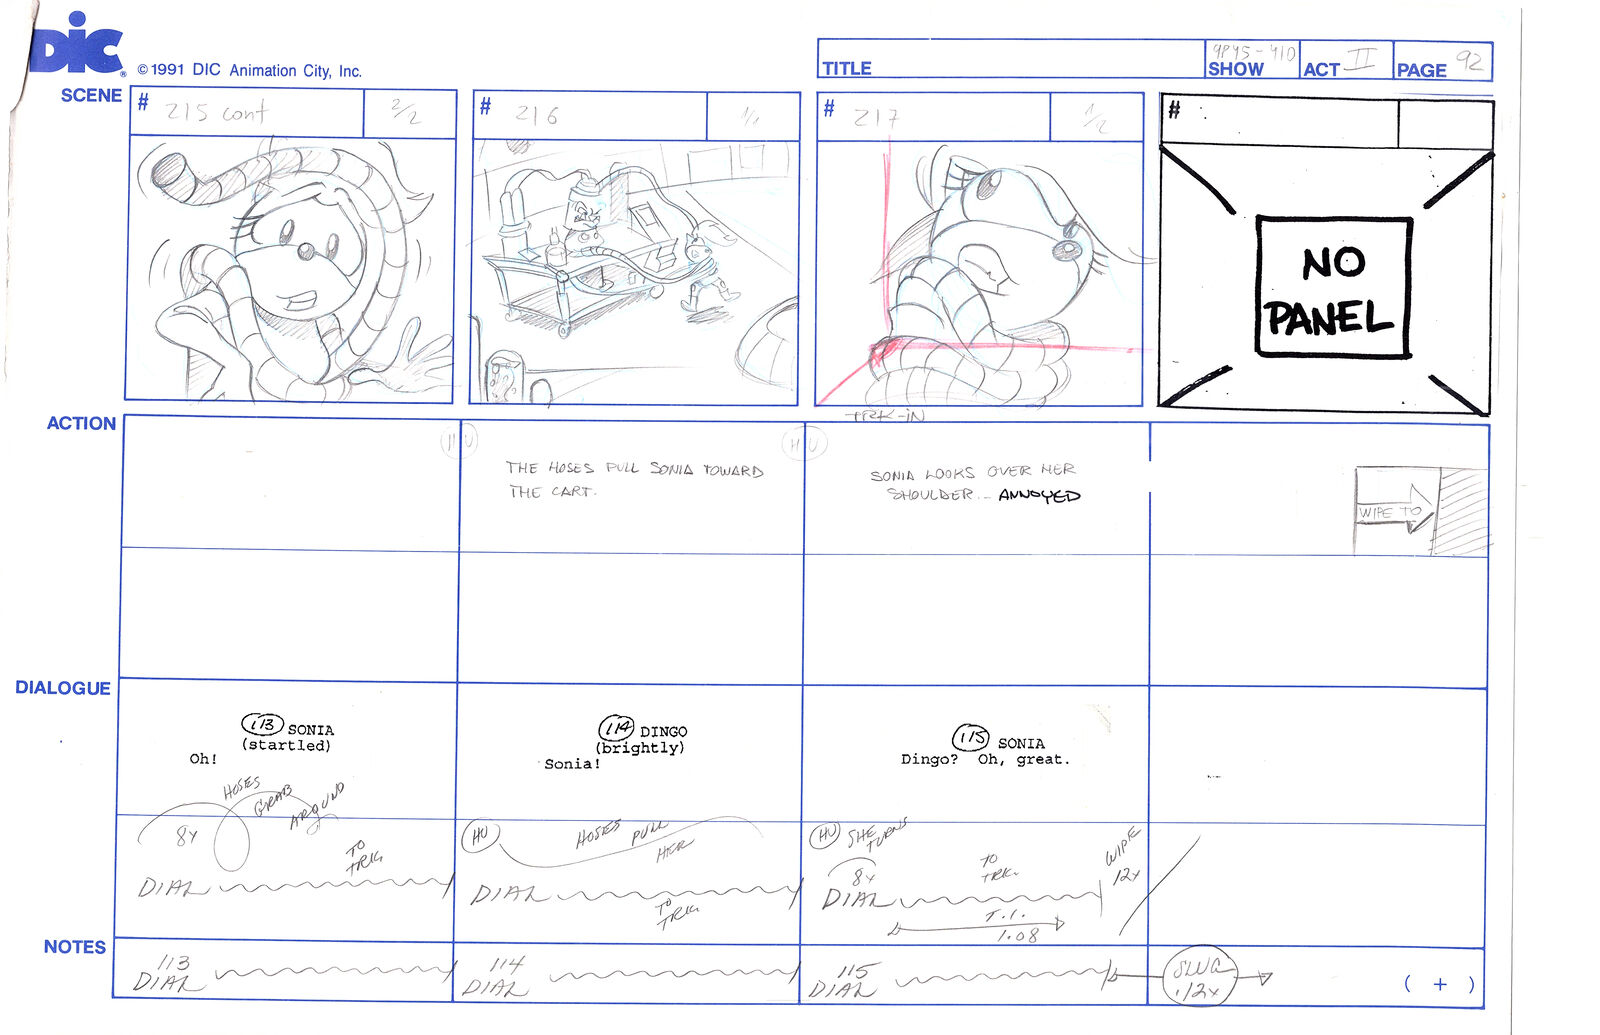 Sonic Underground Huge Hand-Drawn Production Storyboard 1999 from DIC Pg 92